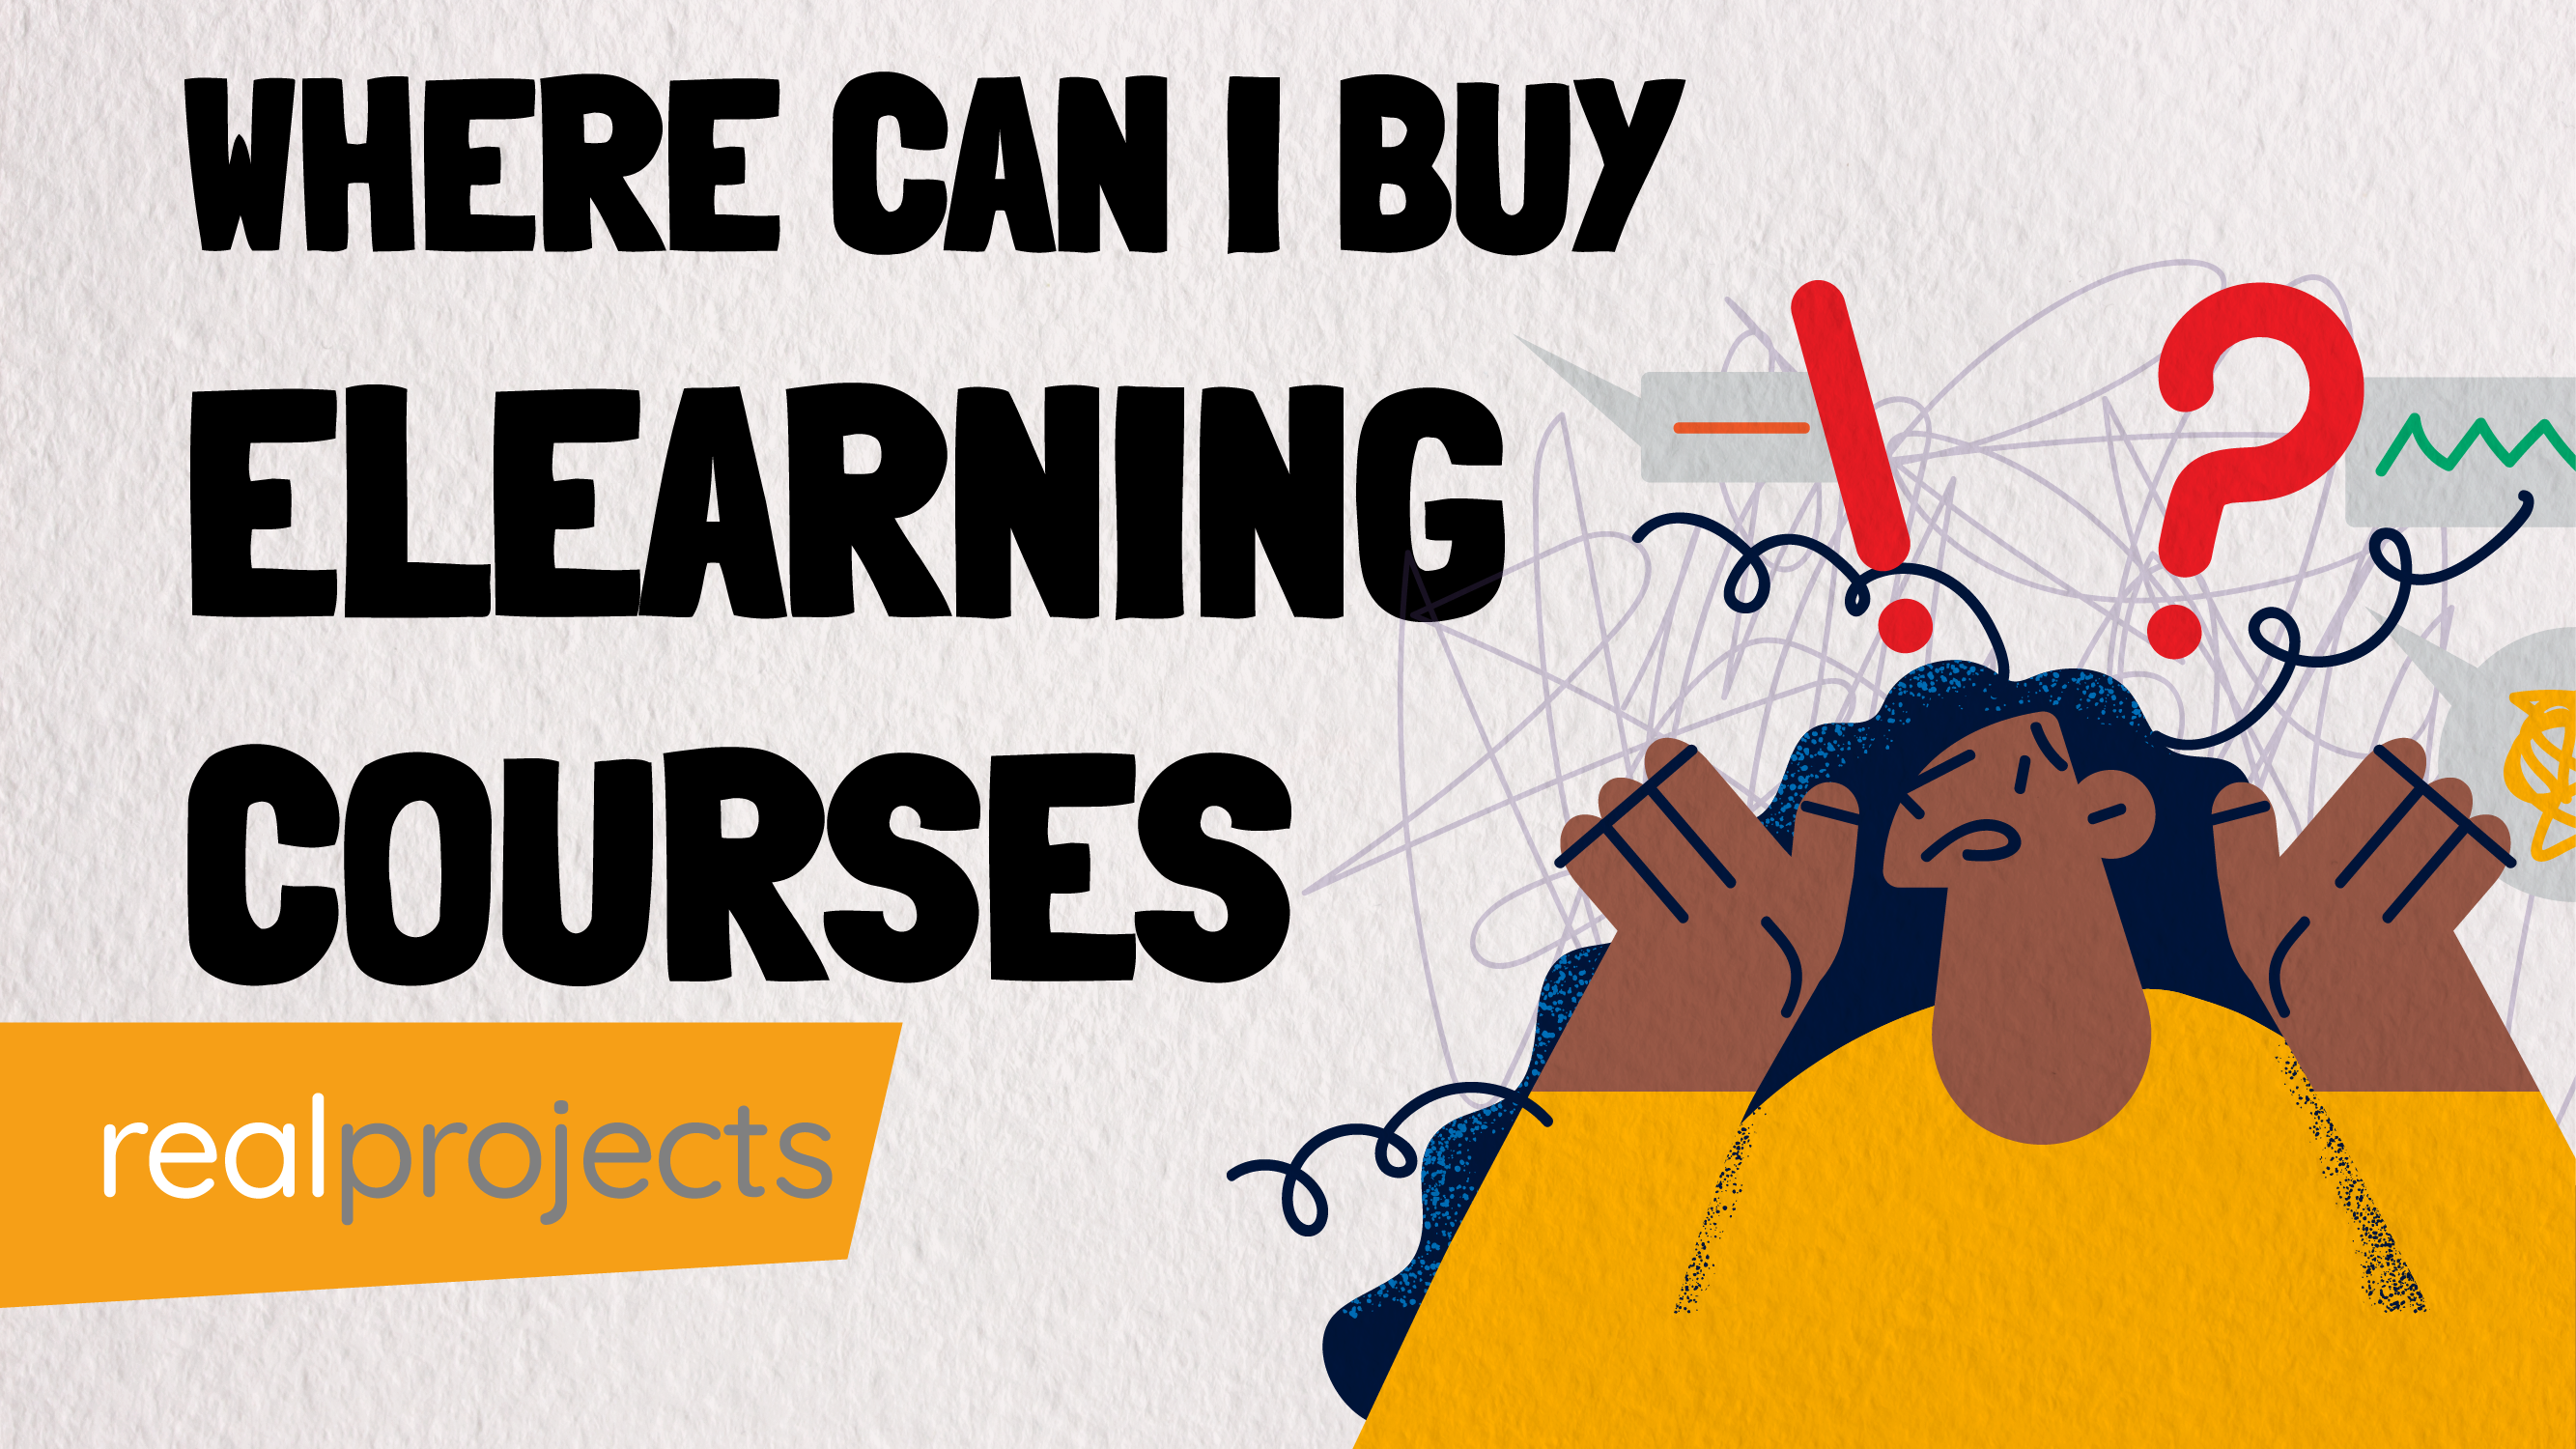 Where can I buy elearning courses?